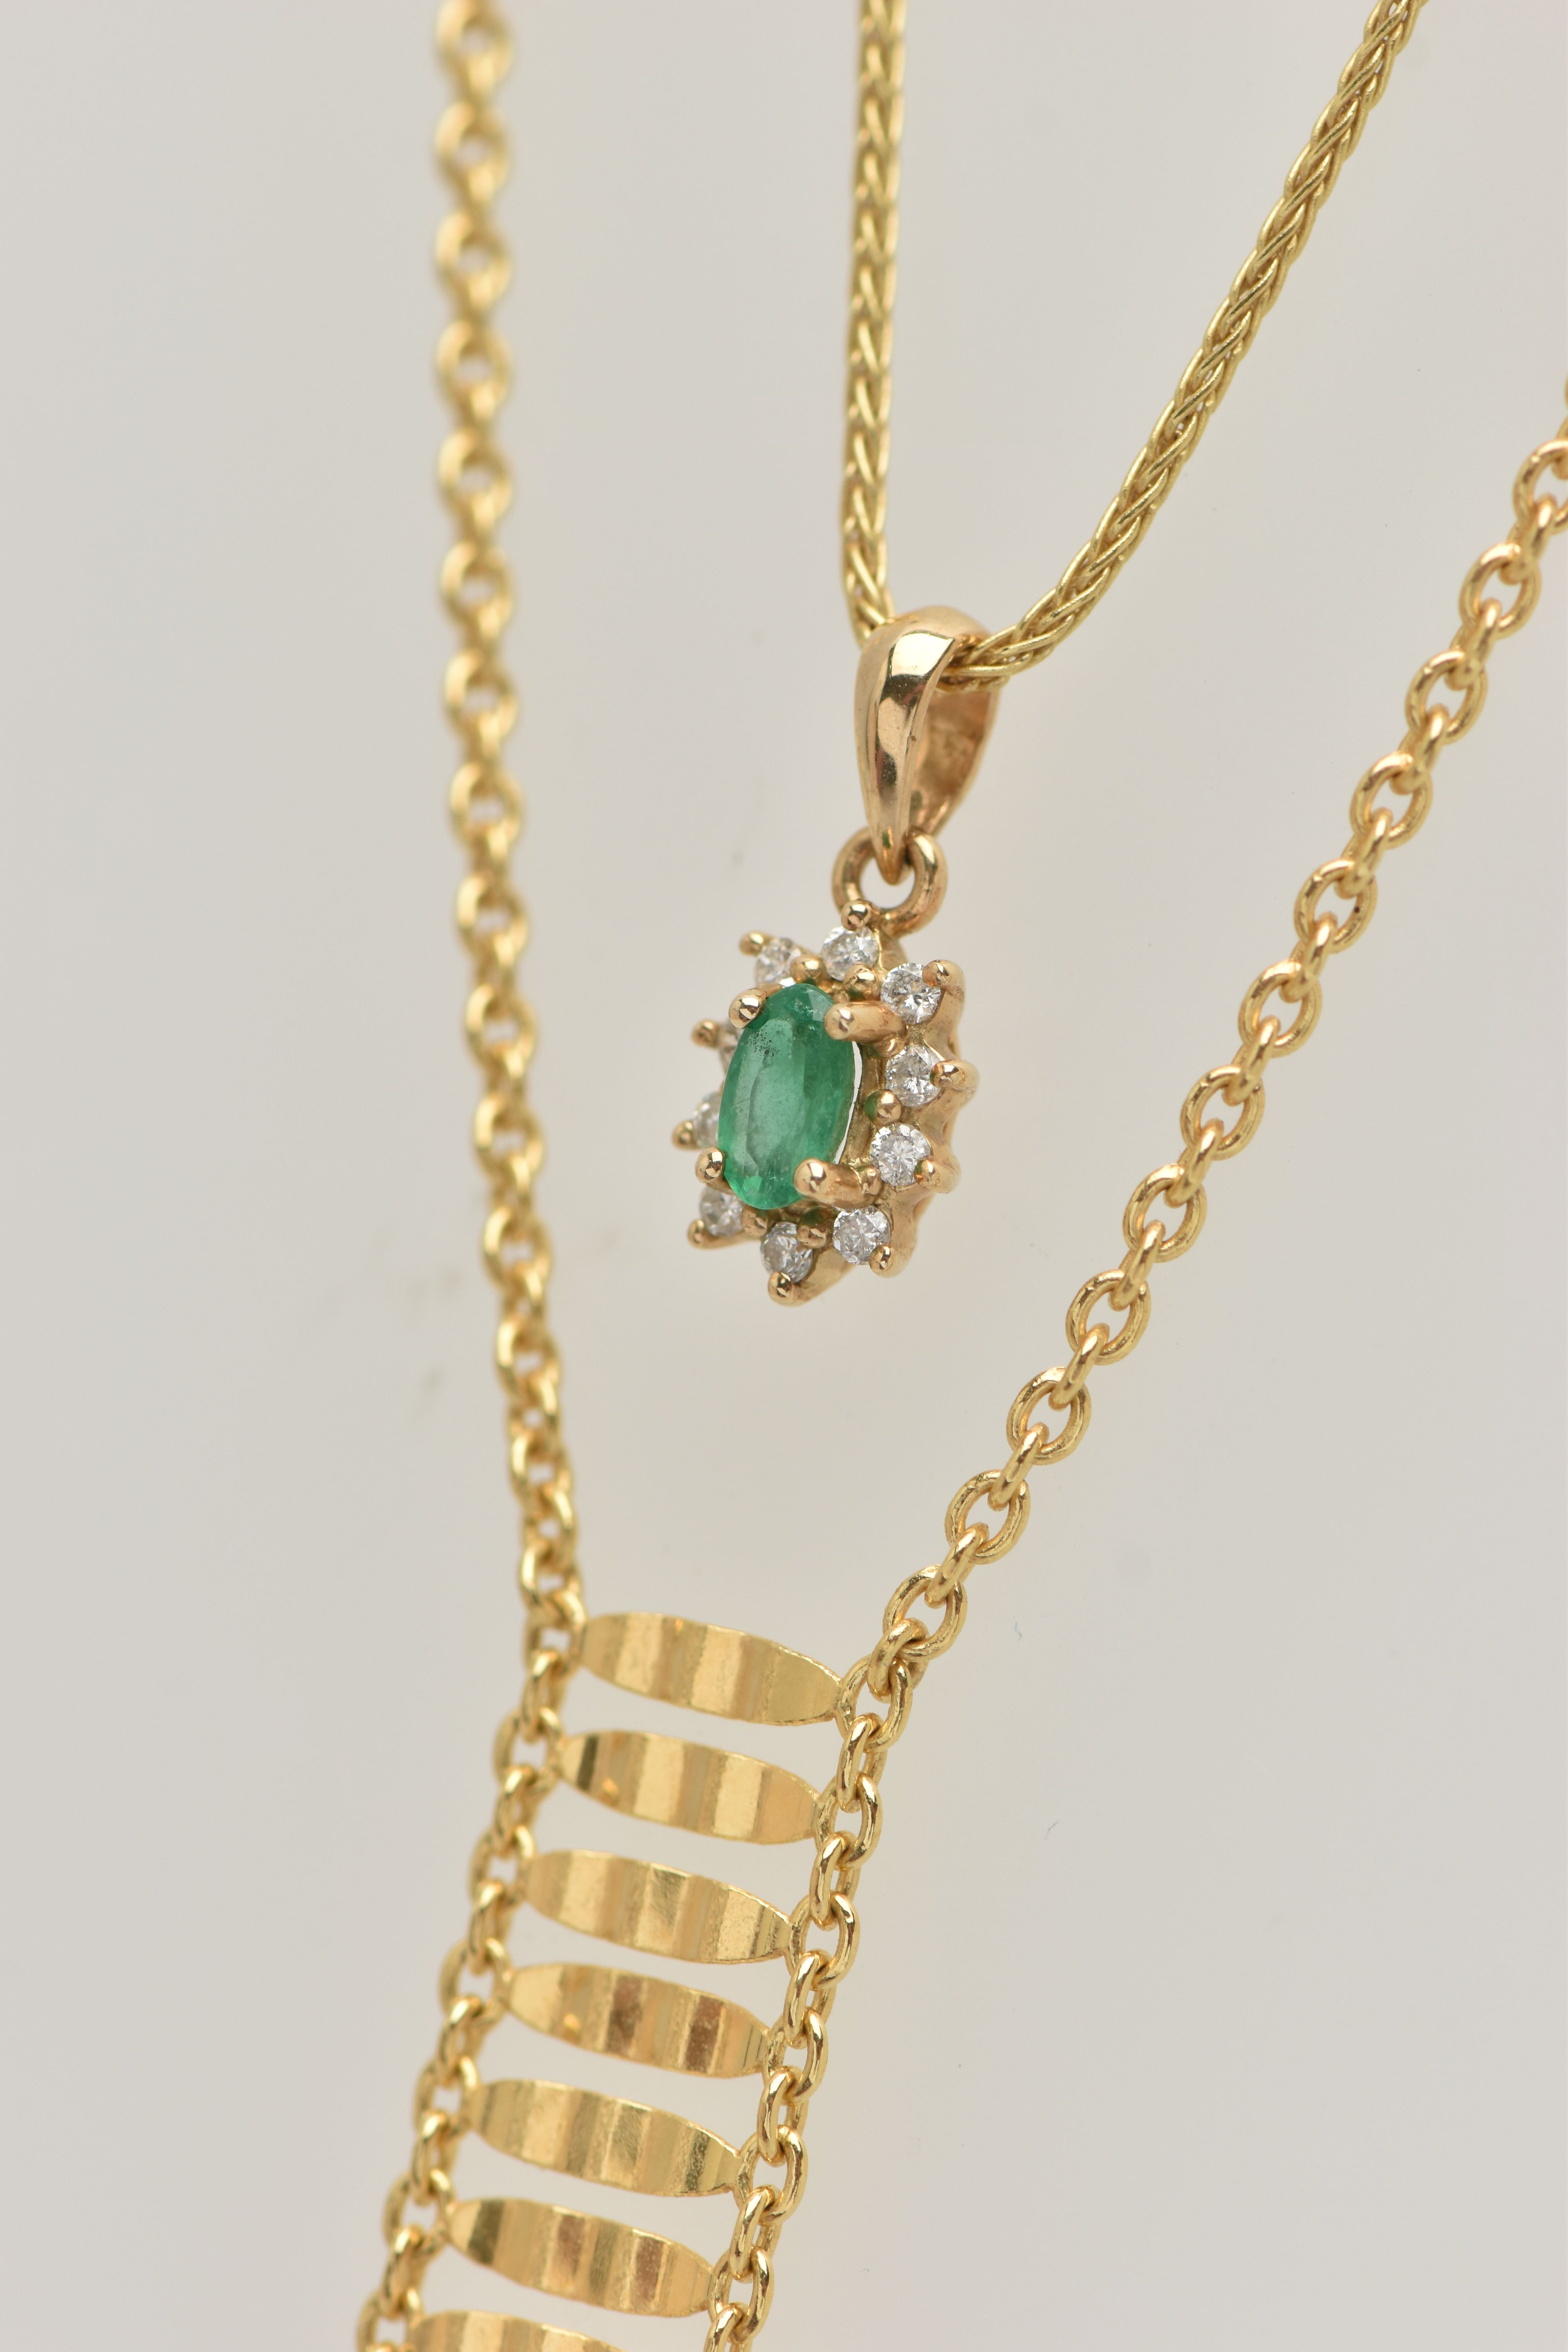 TWO 9CT GOLD PENDANT NECKLACES, the first with a textured style pendant fixed to a Rolo link chain - Image 5 of 5